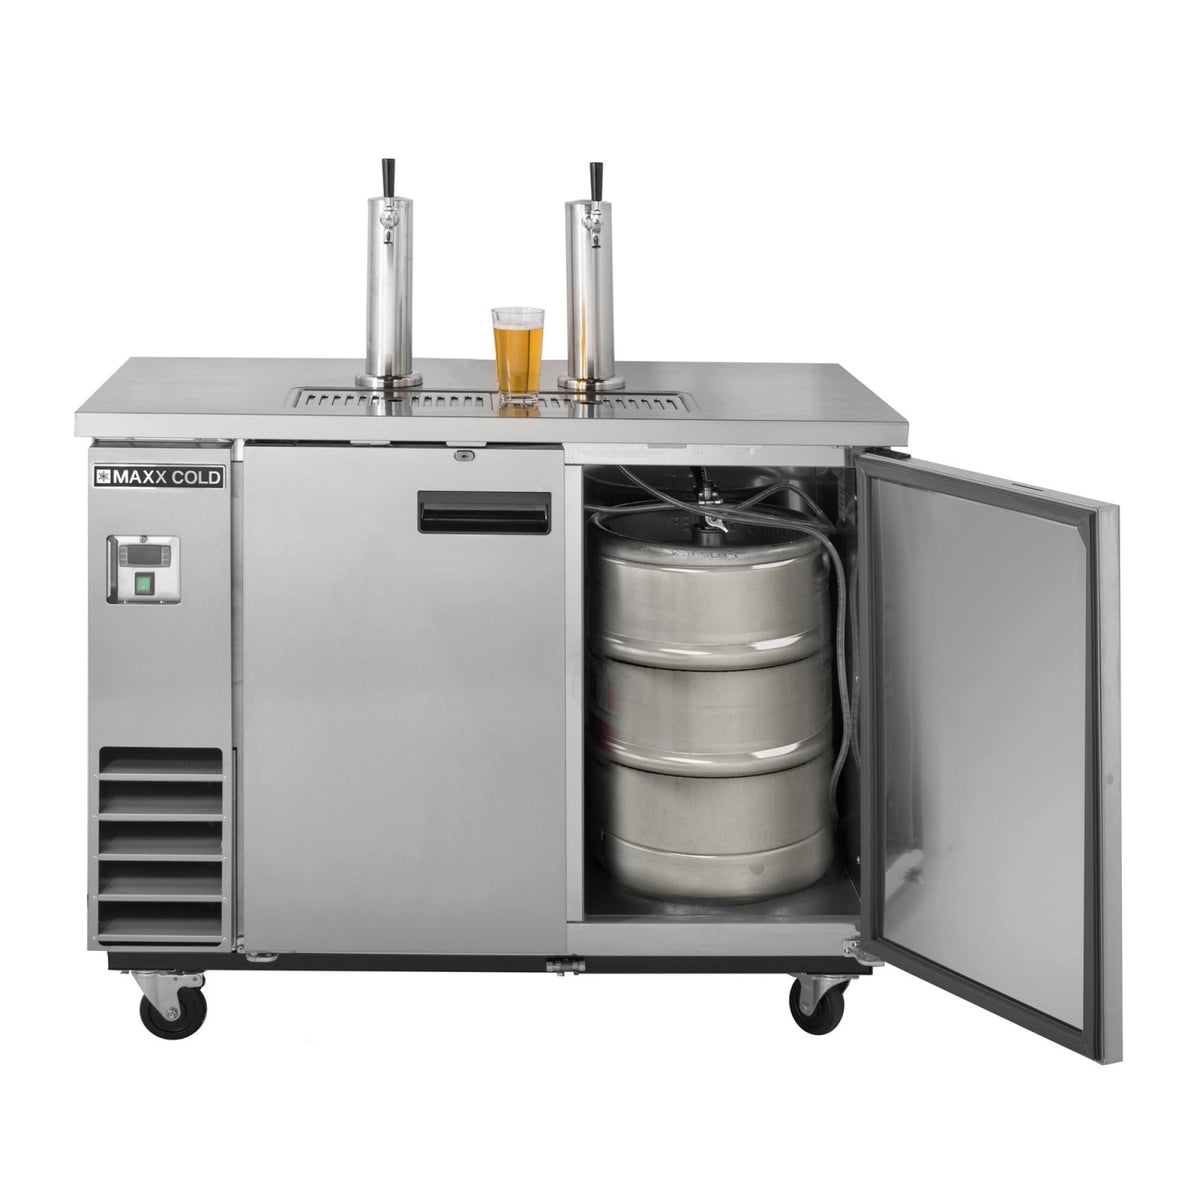 Maxx Cold MXBD60 - 2SHC X - Series Dual Tower, 2 Tap Beer Dispenser, 61"W, 14.2 cu. ft. - TheChefStore.Com